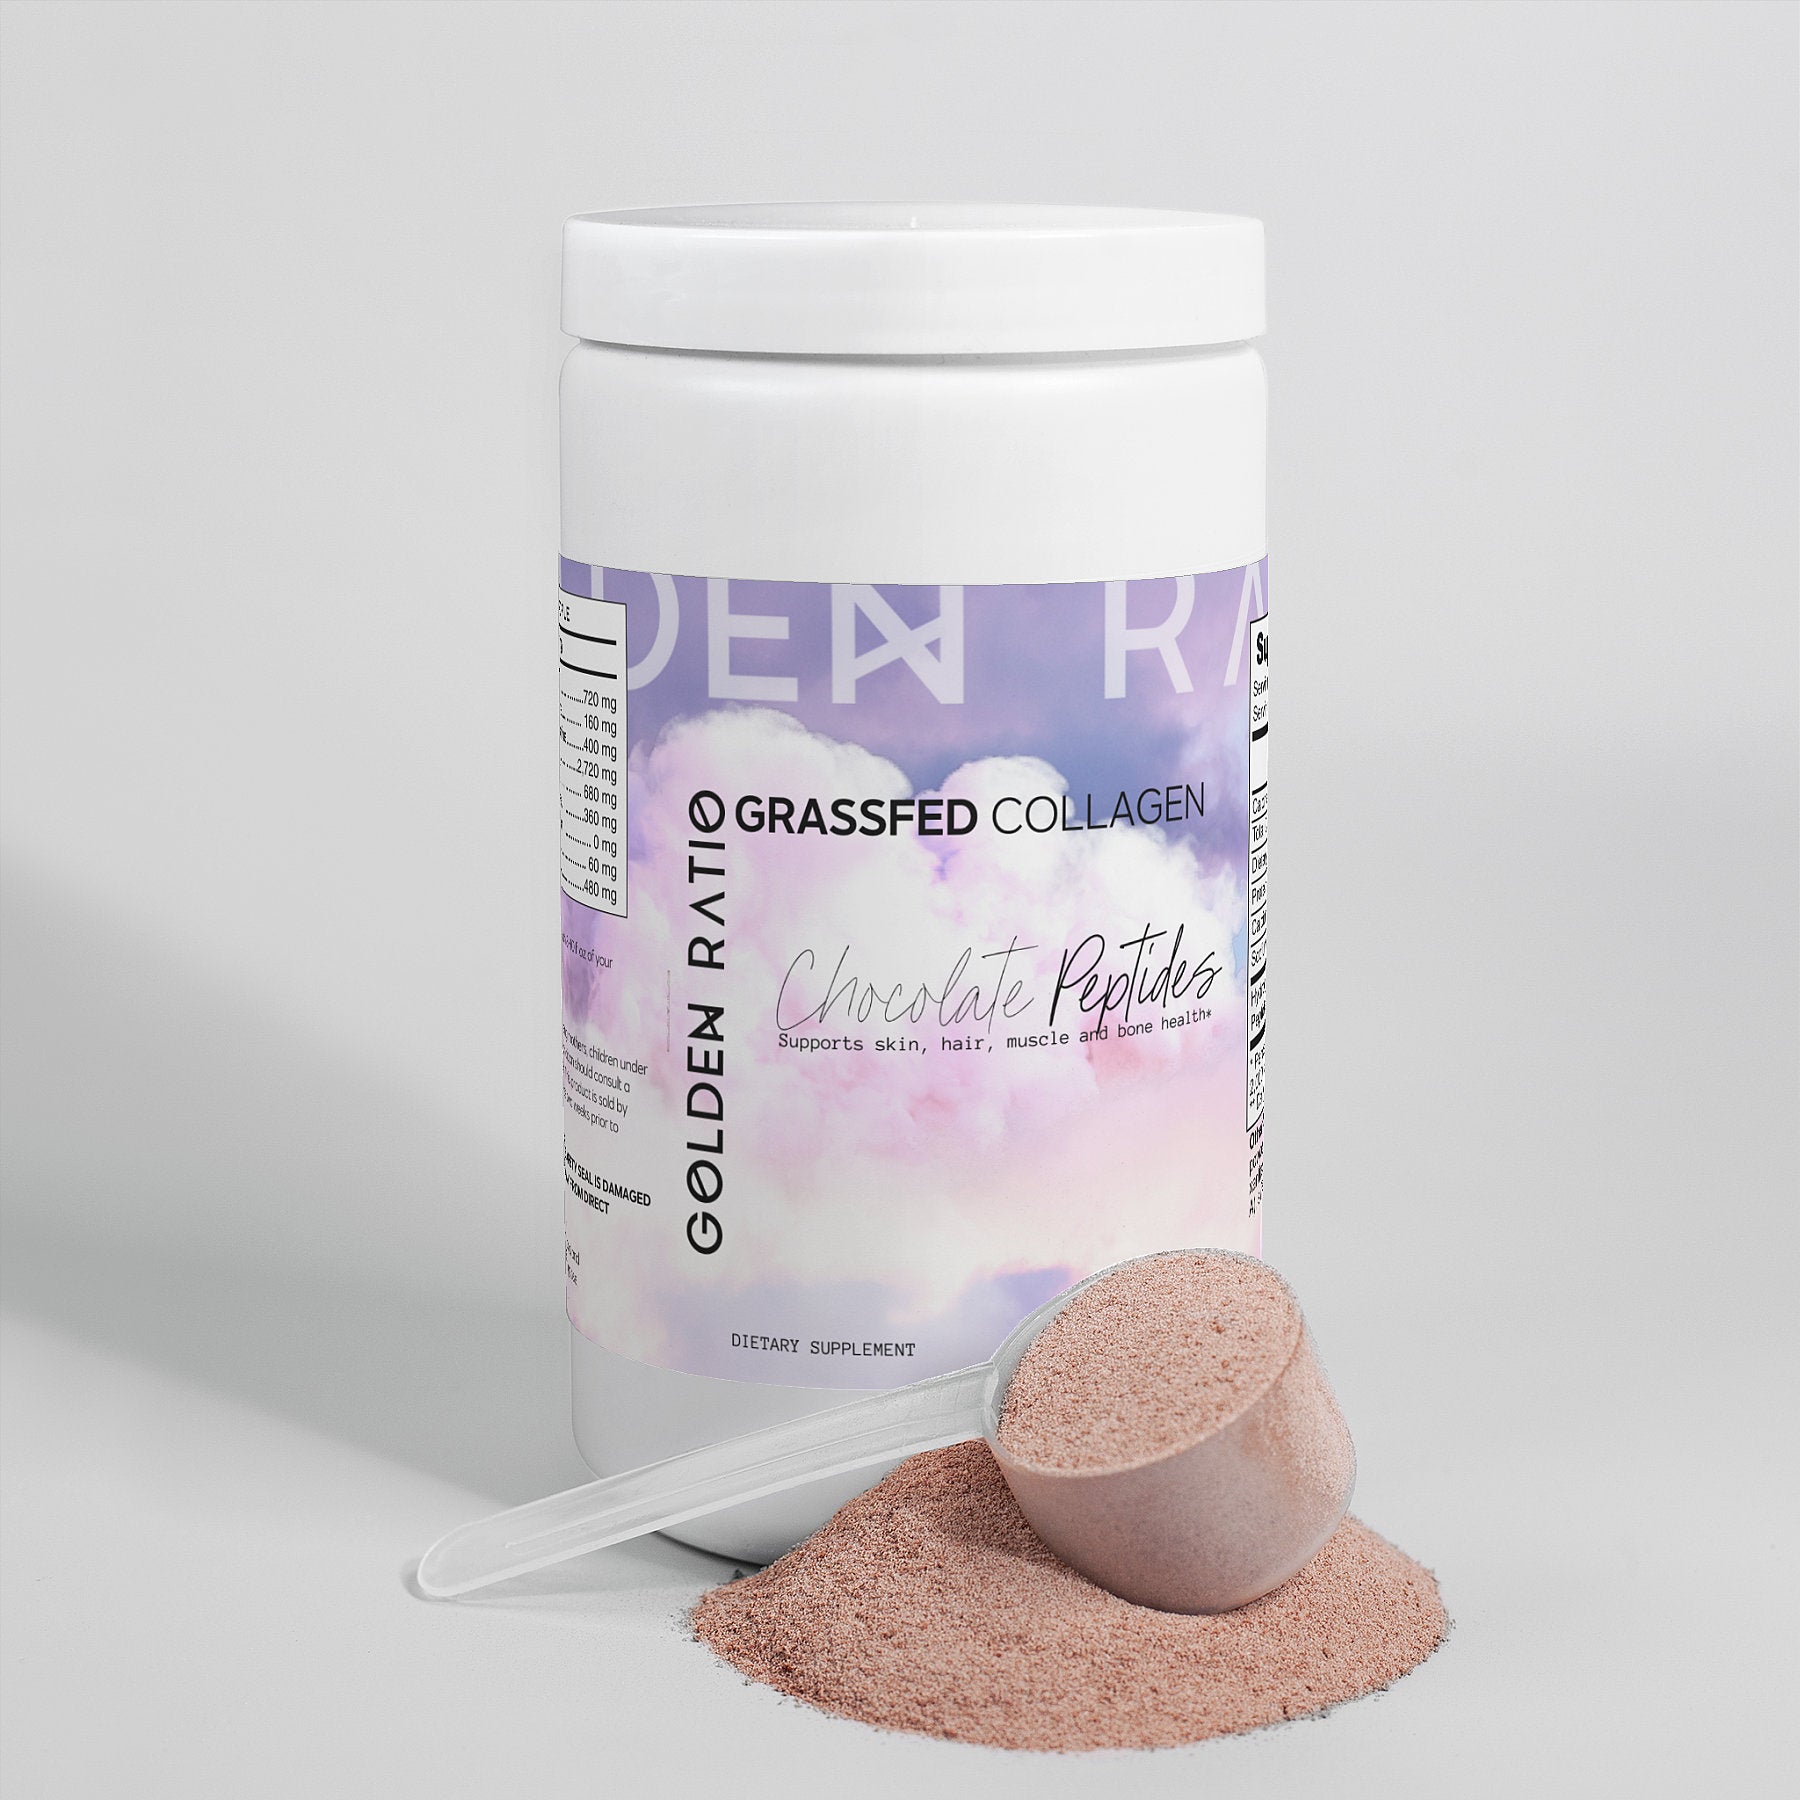 Grass-Fed Collagen Chocolate Peptides